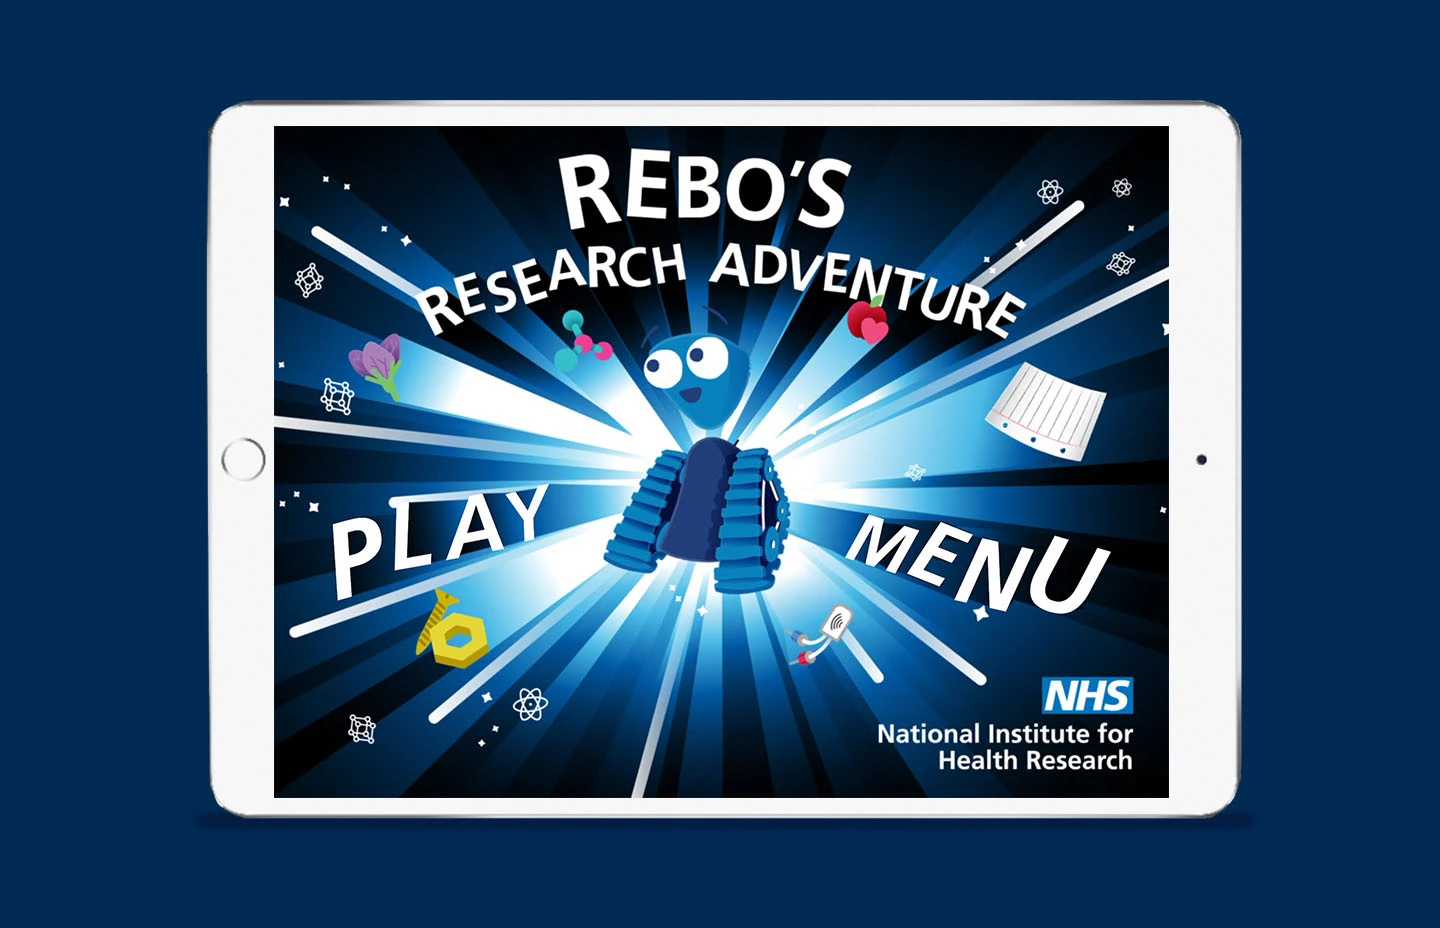 Landscape tablet device showing welcome screen for Rebo's Research Adventure app